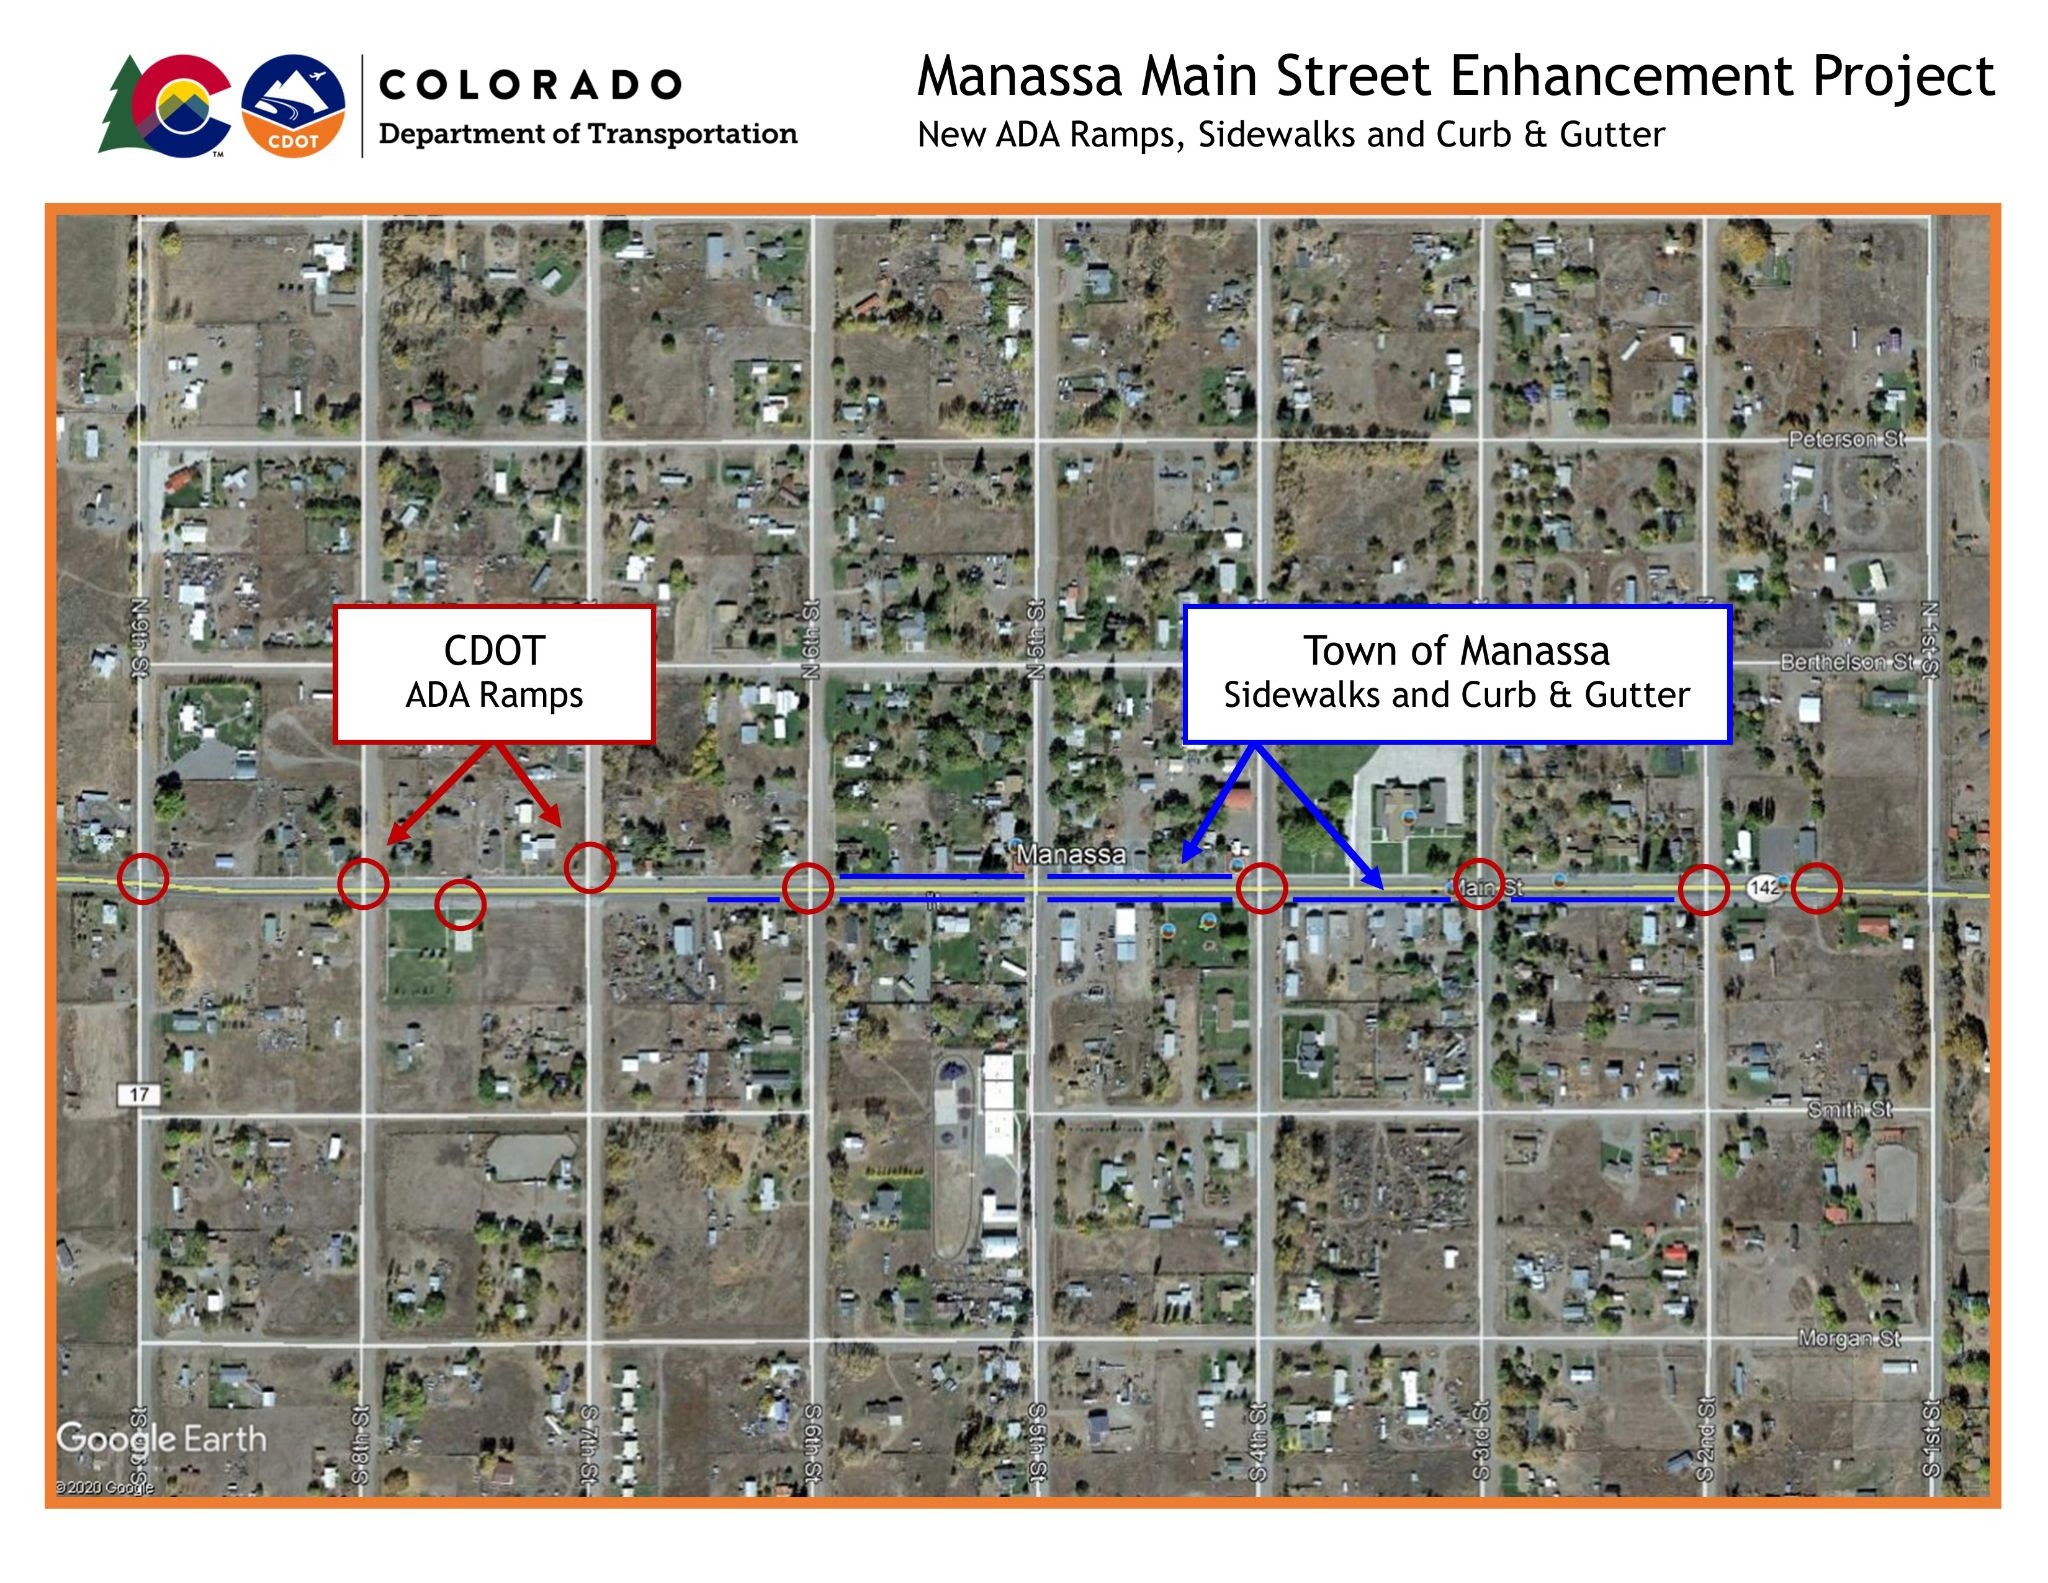 Manassa Main Street Enhancement Project map - New ADA ramps, sidewalks and curbs and gutters detail image